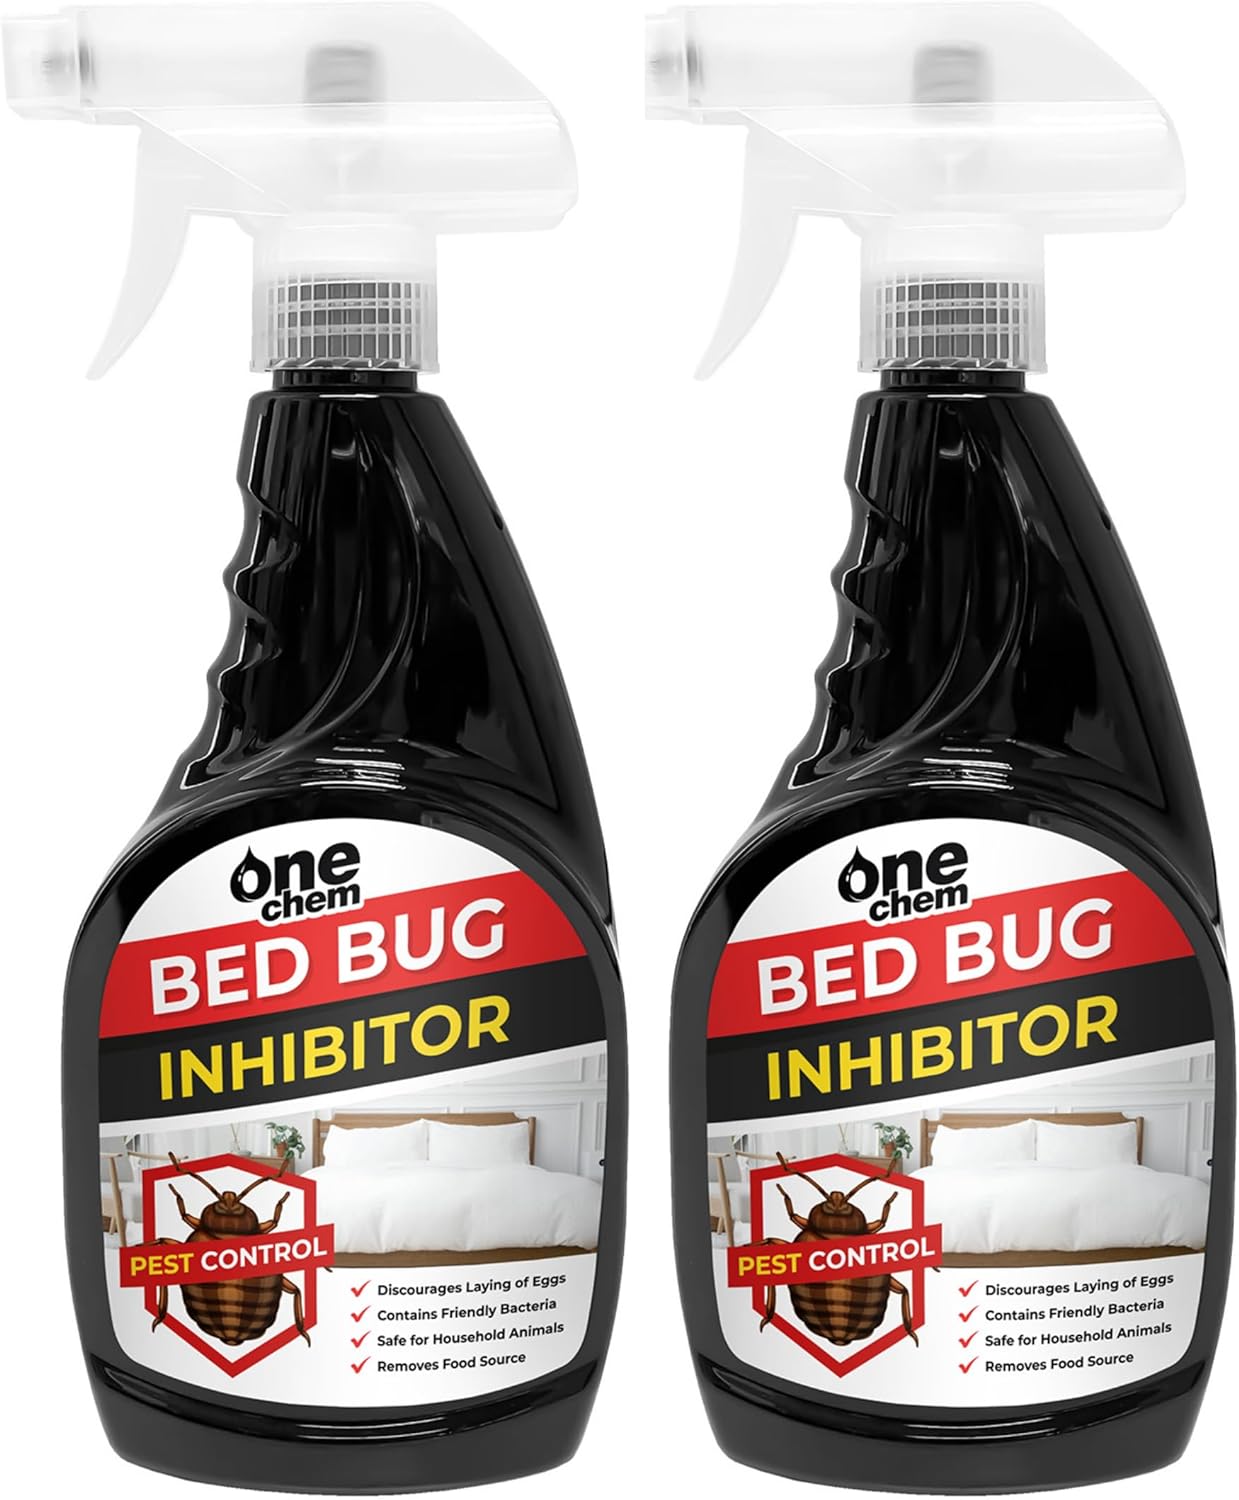 One Chem Bed Bug Inhibitor 2 x 500ml Repellent